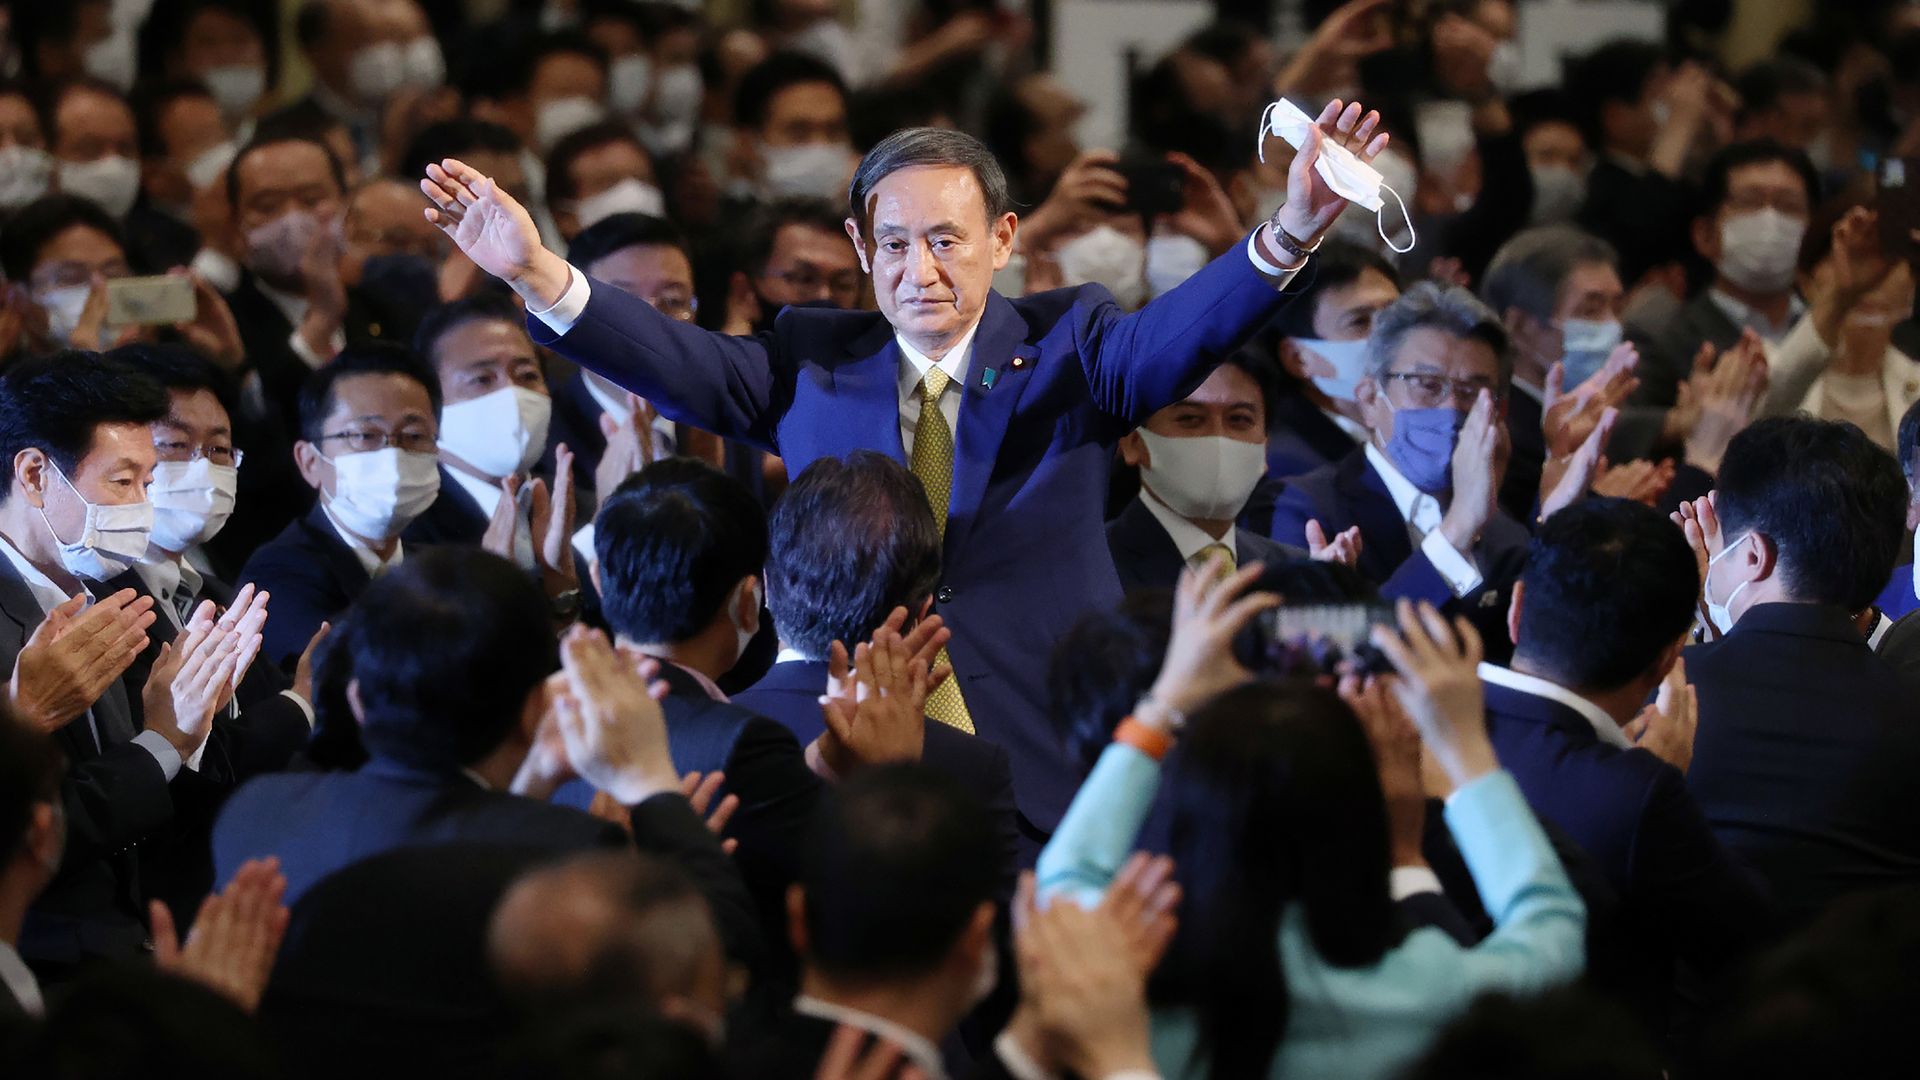 Japan Prime Minister Yoshide Suga is seen celebrating his election as head of his political party.